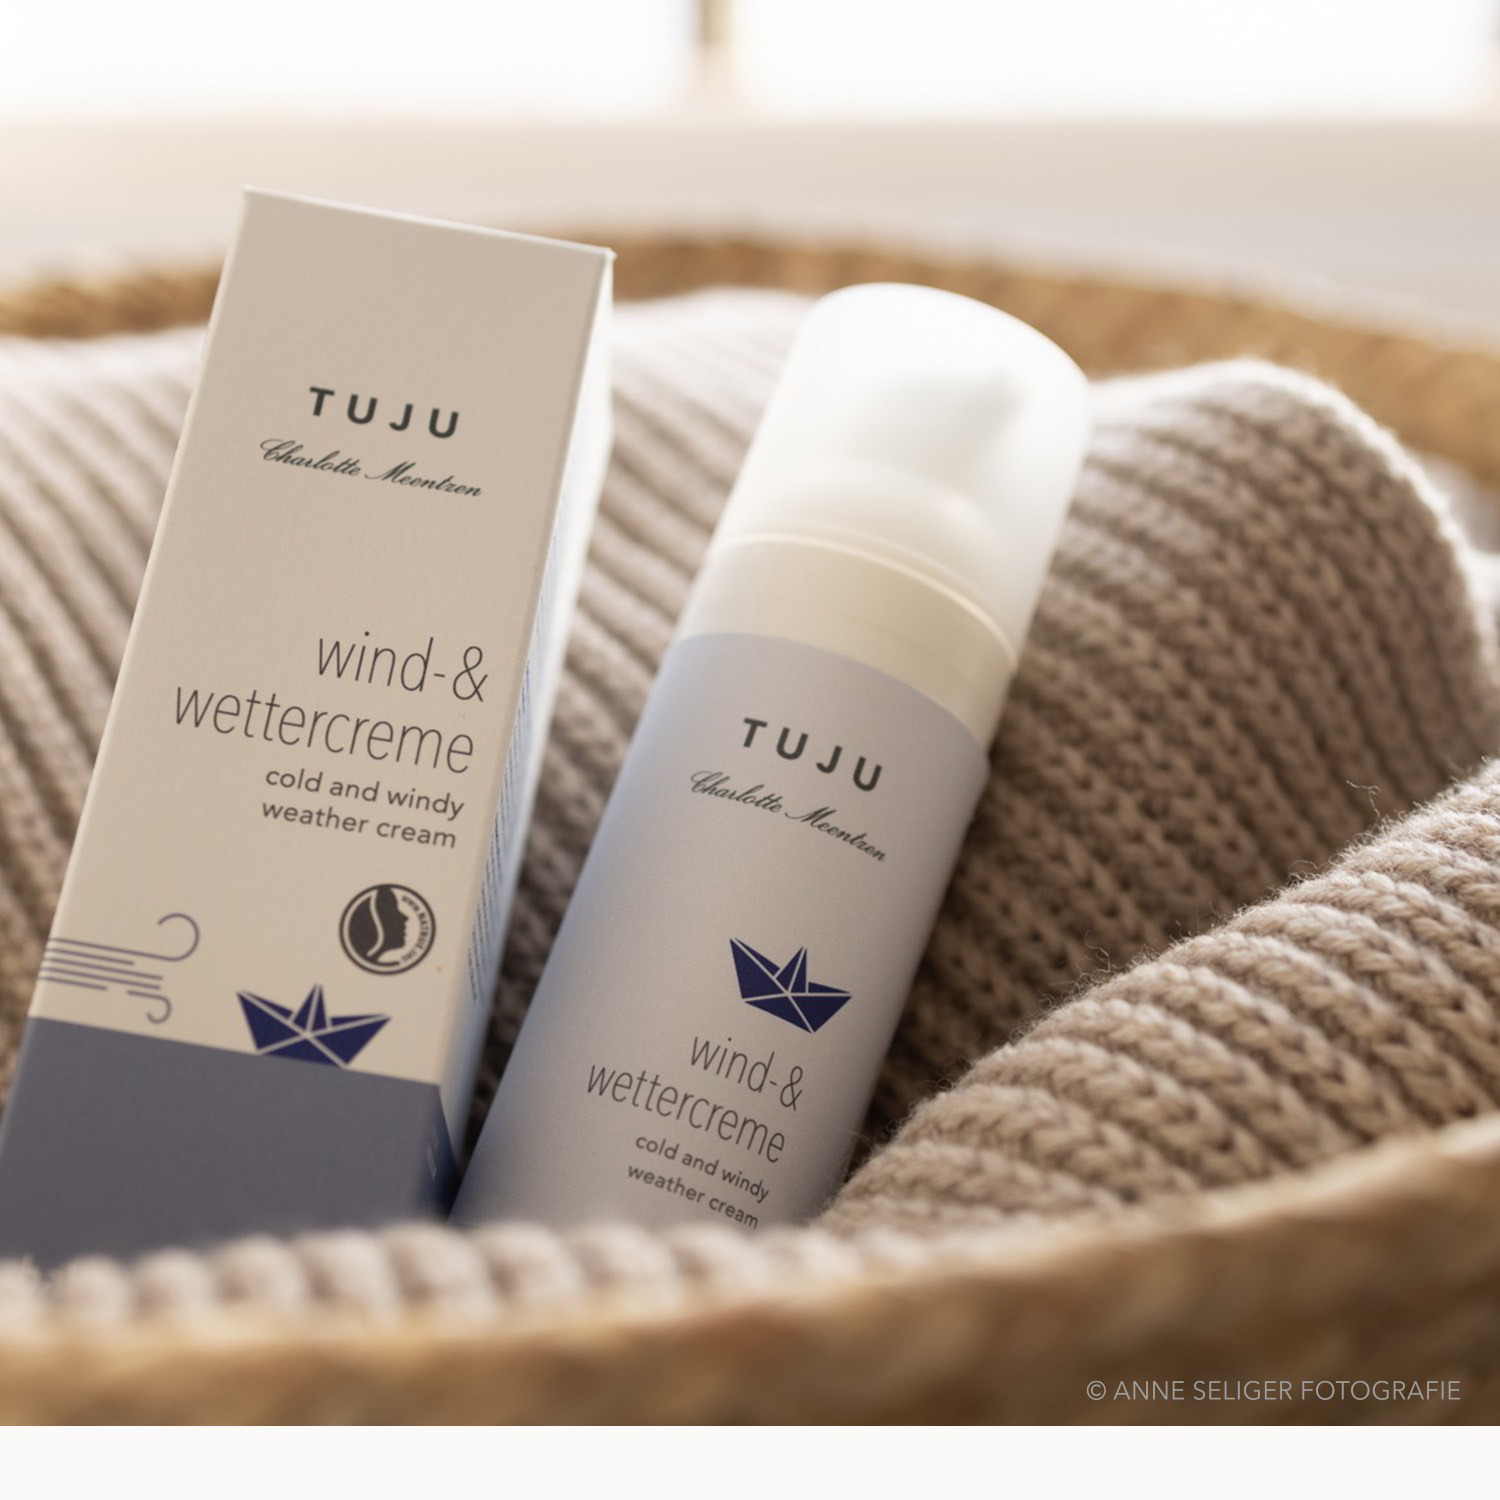 TUJU cold and windy Weather Cream For protected baby skin in cold temperatures